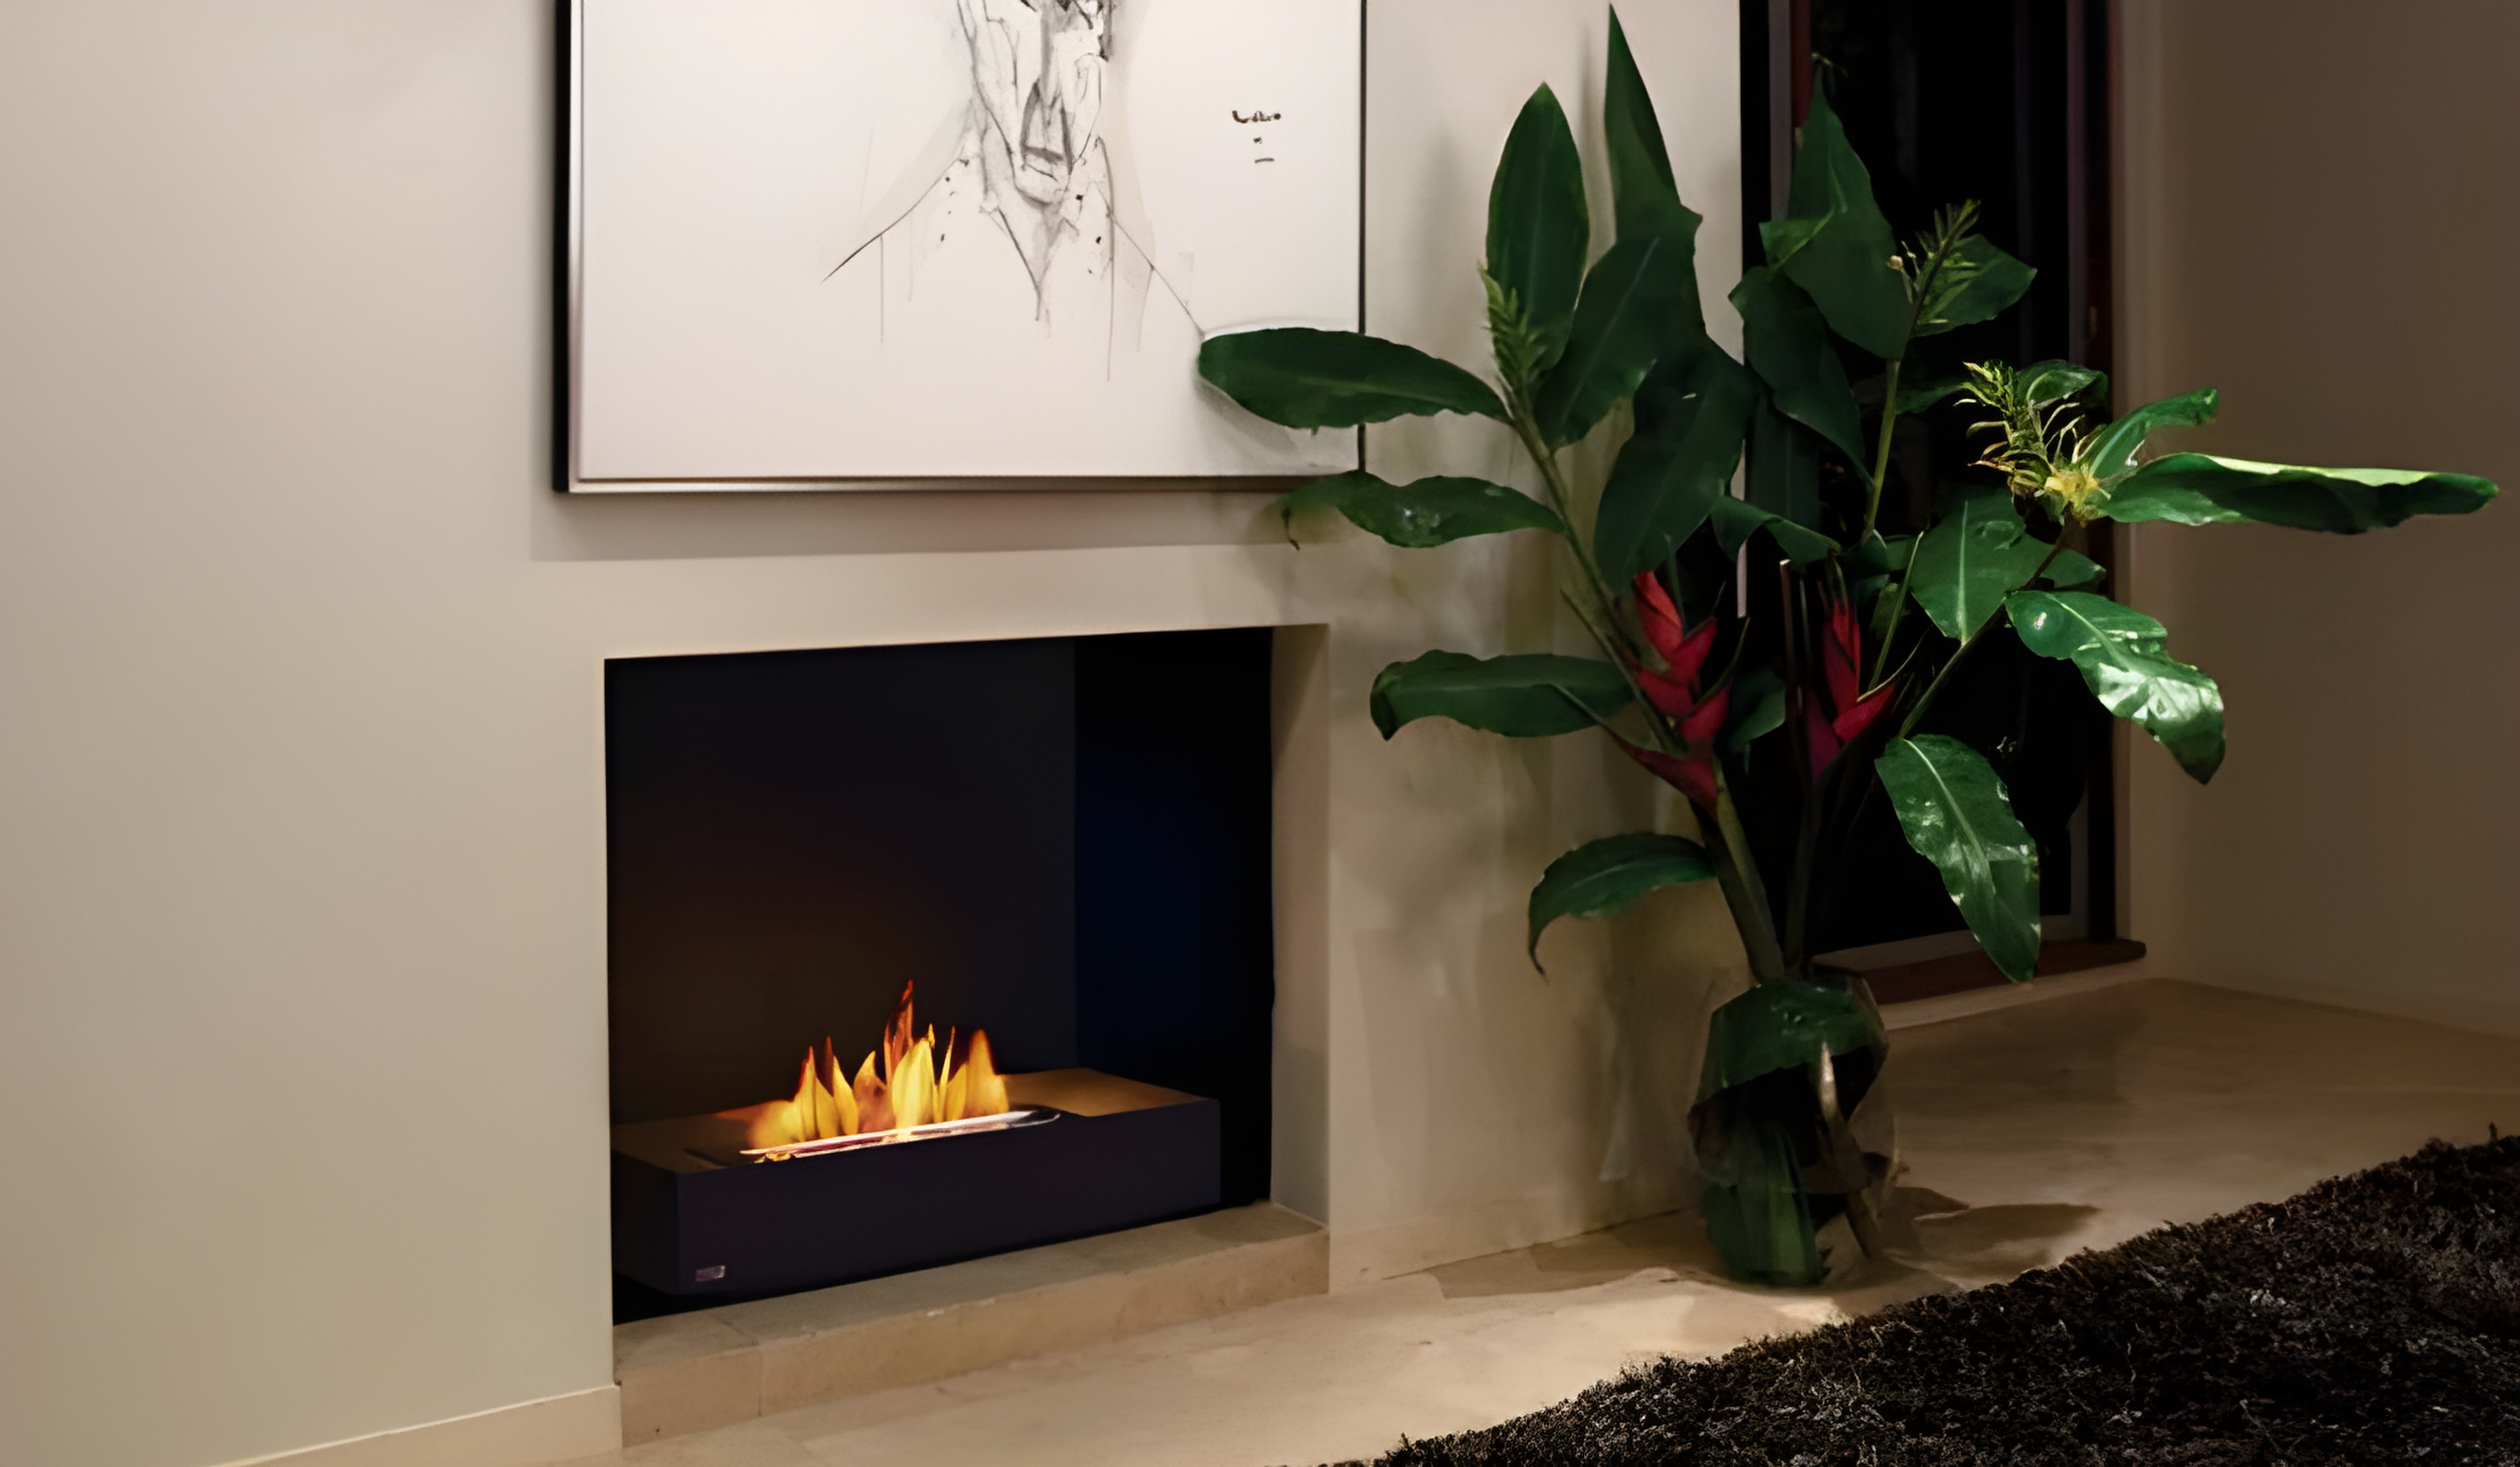 EcoSmart Fire Grate 30" Ethanol Fireplace Insert by Mad Design Group